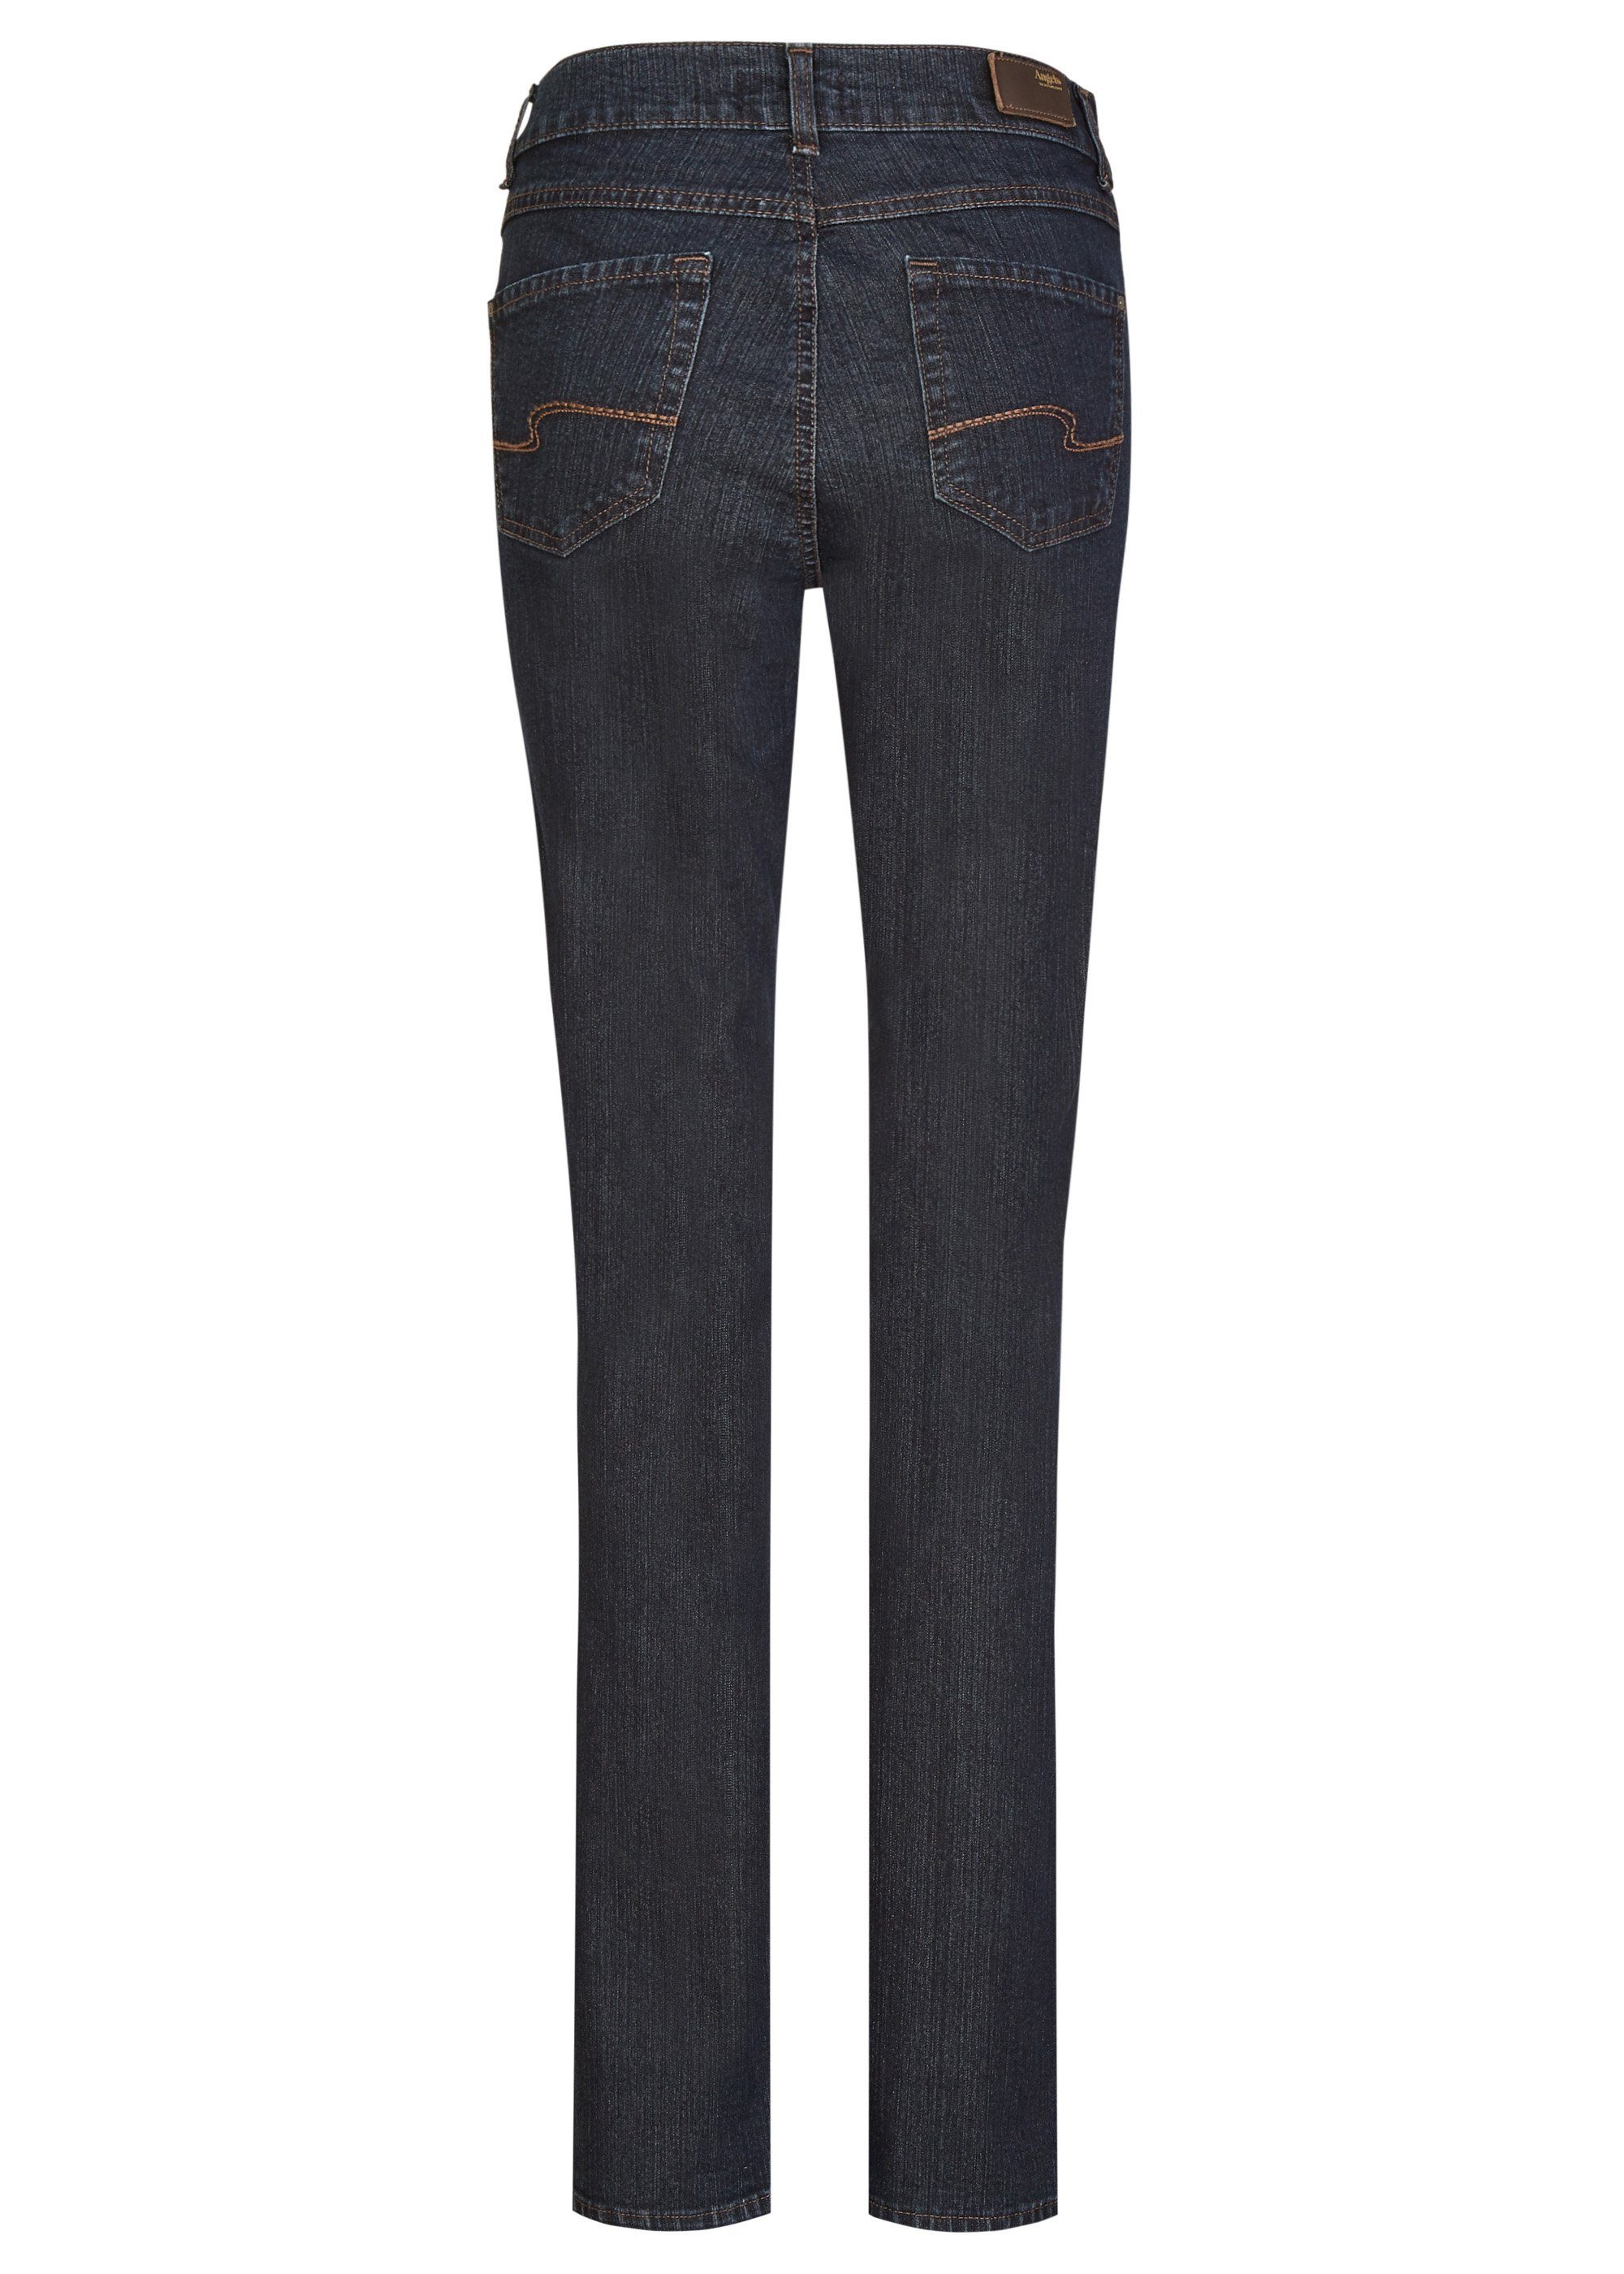 ANGELS Stretch-Jeans ANGELS night JEANS 90.30 53 LUCI blue